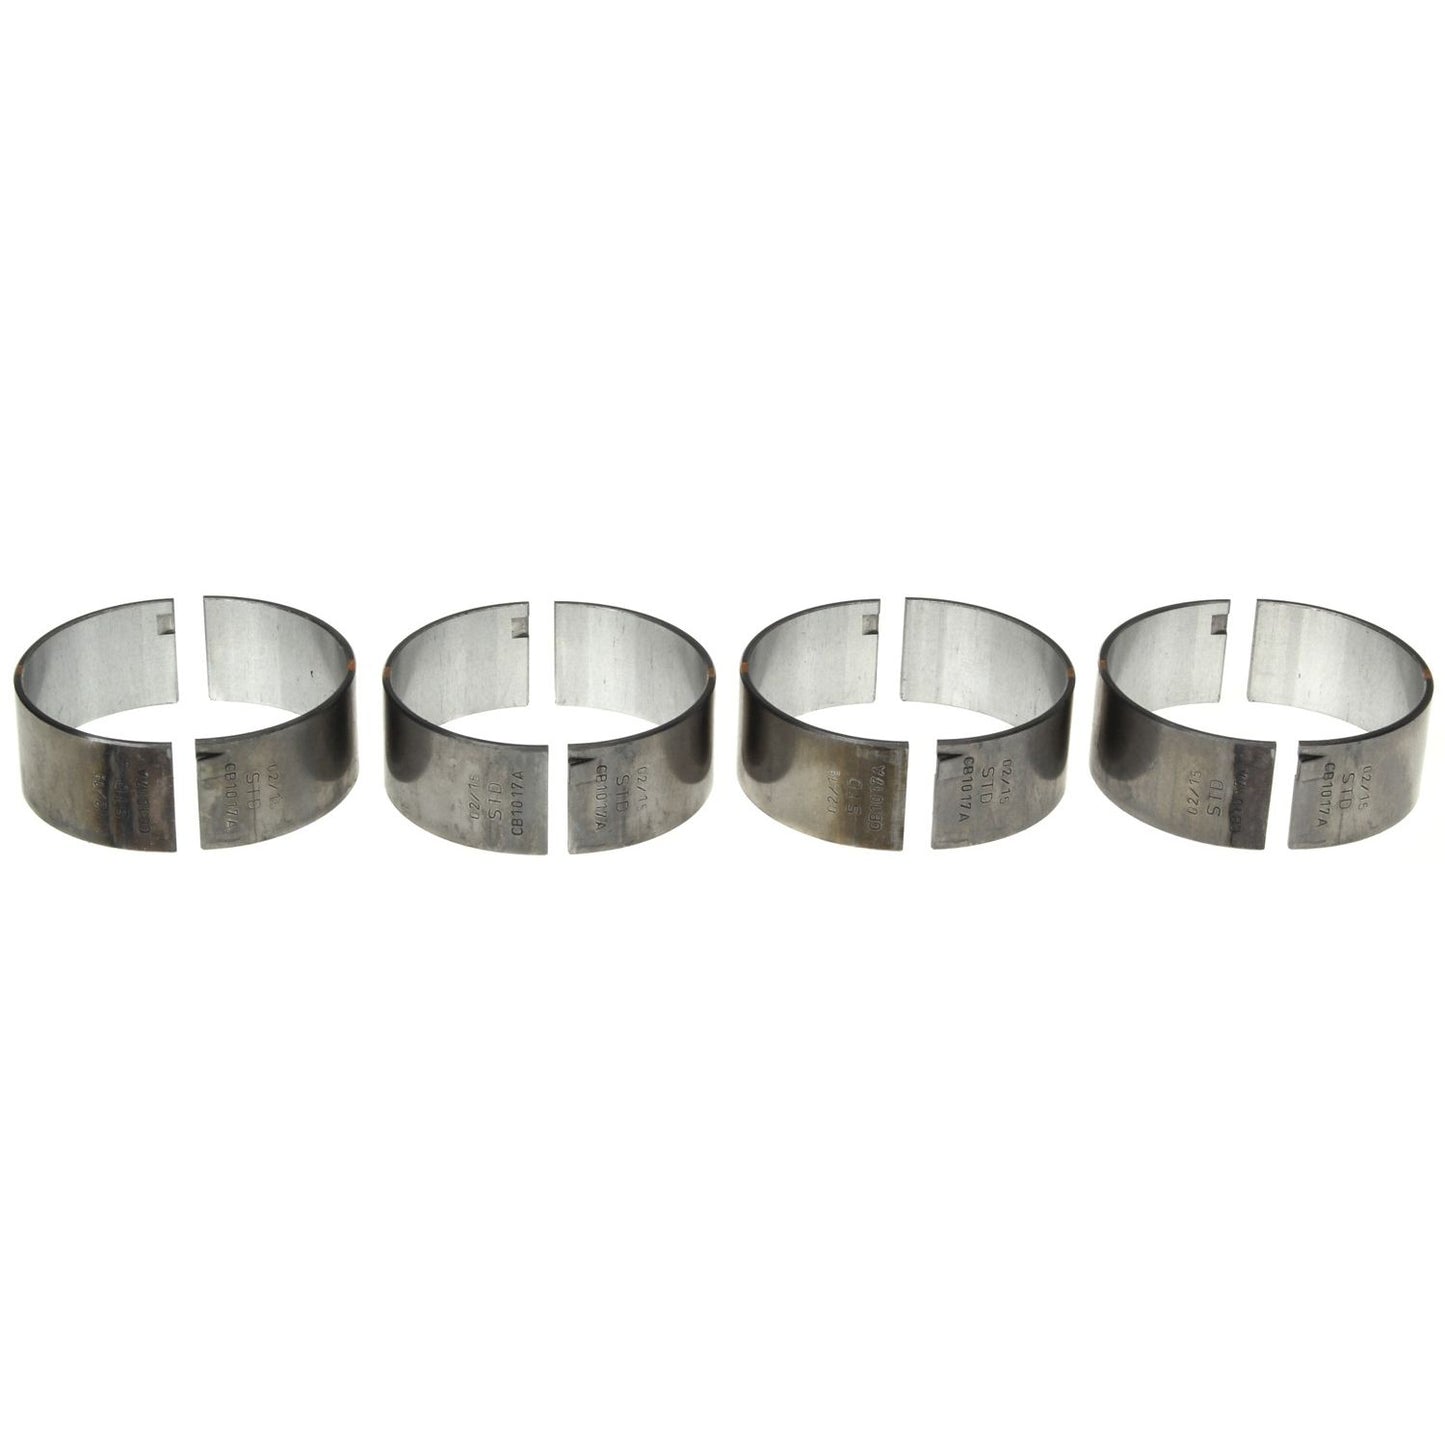 Clevite CB-1017A(4) Engine Connecting Rod Bearing Set